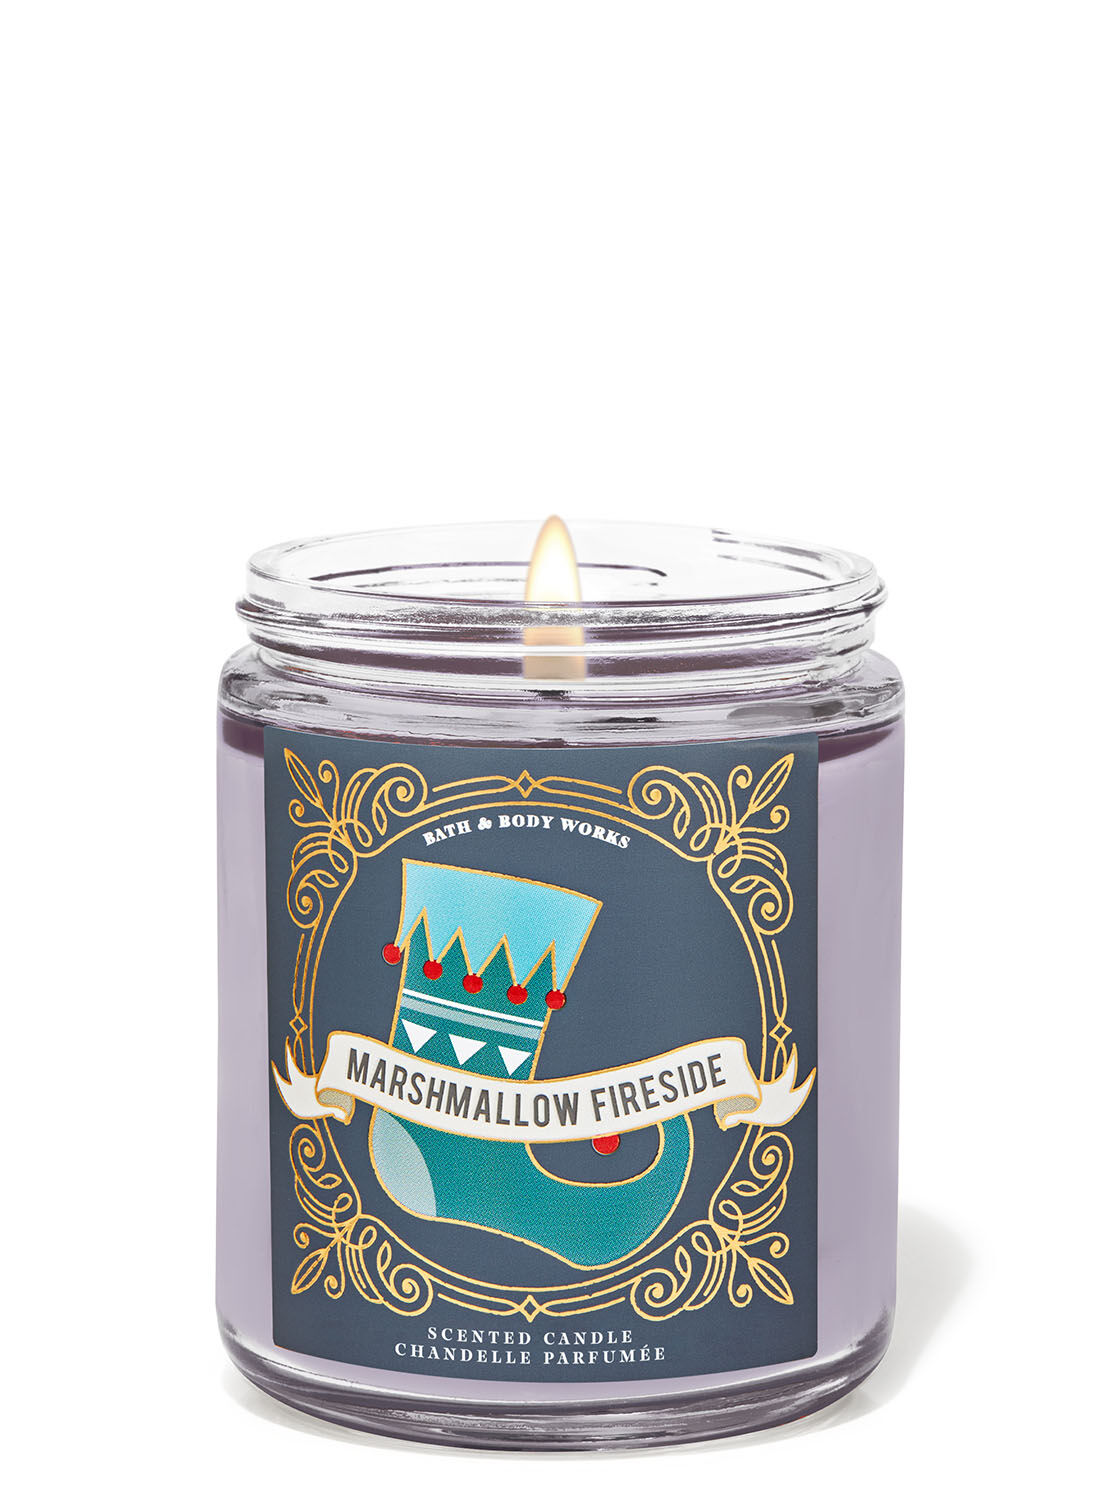 2012 marshmallow fireside candle